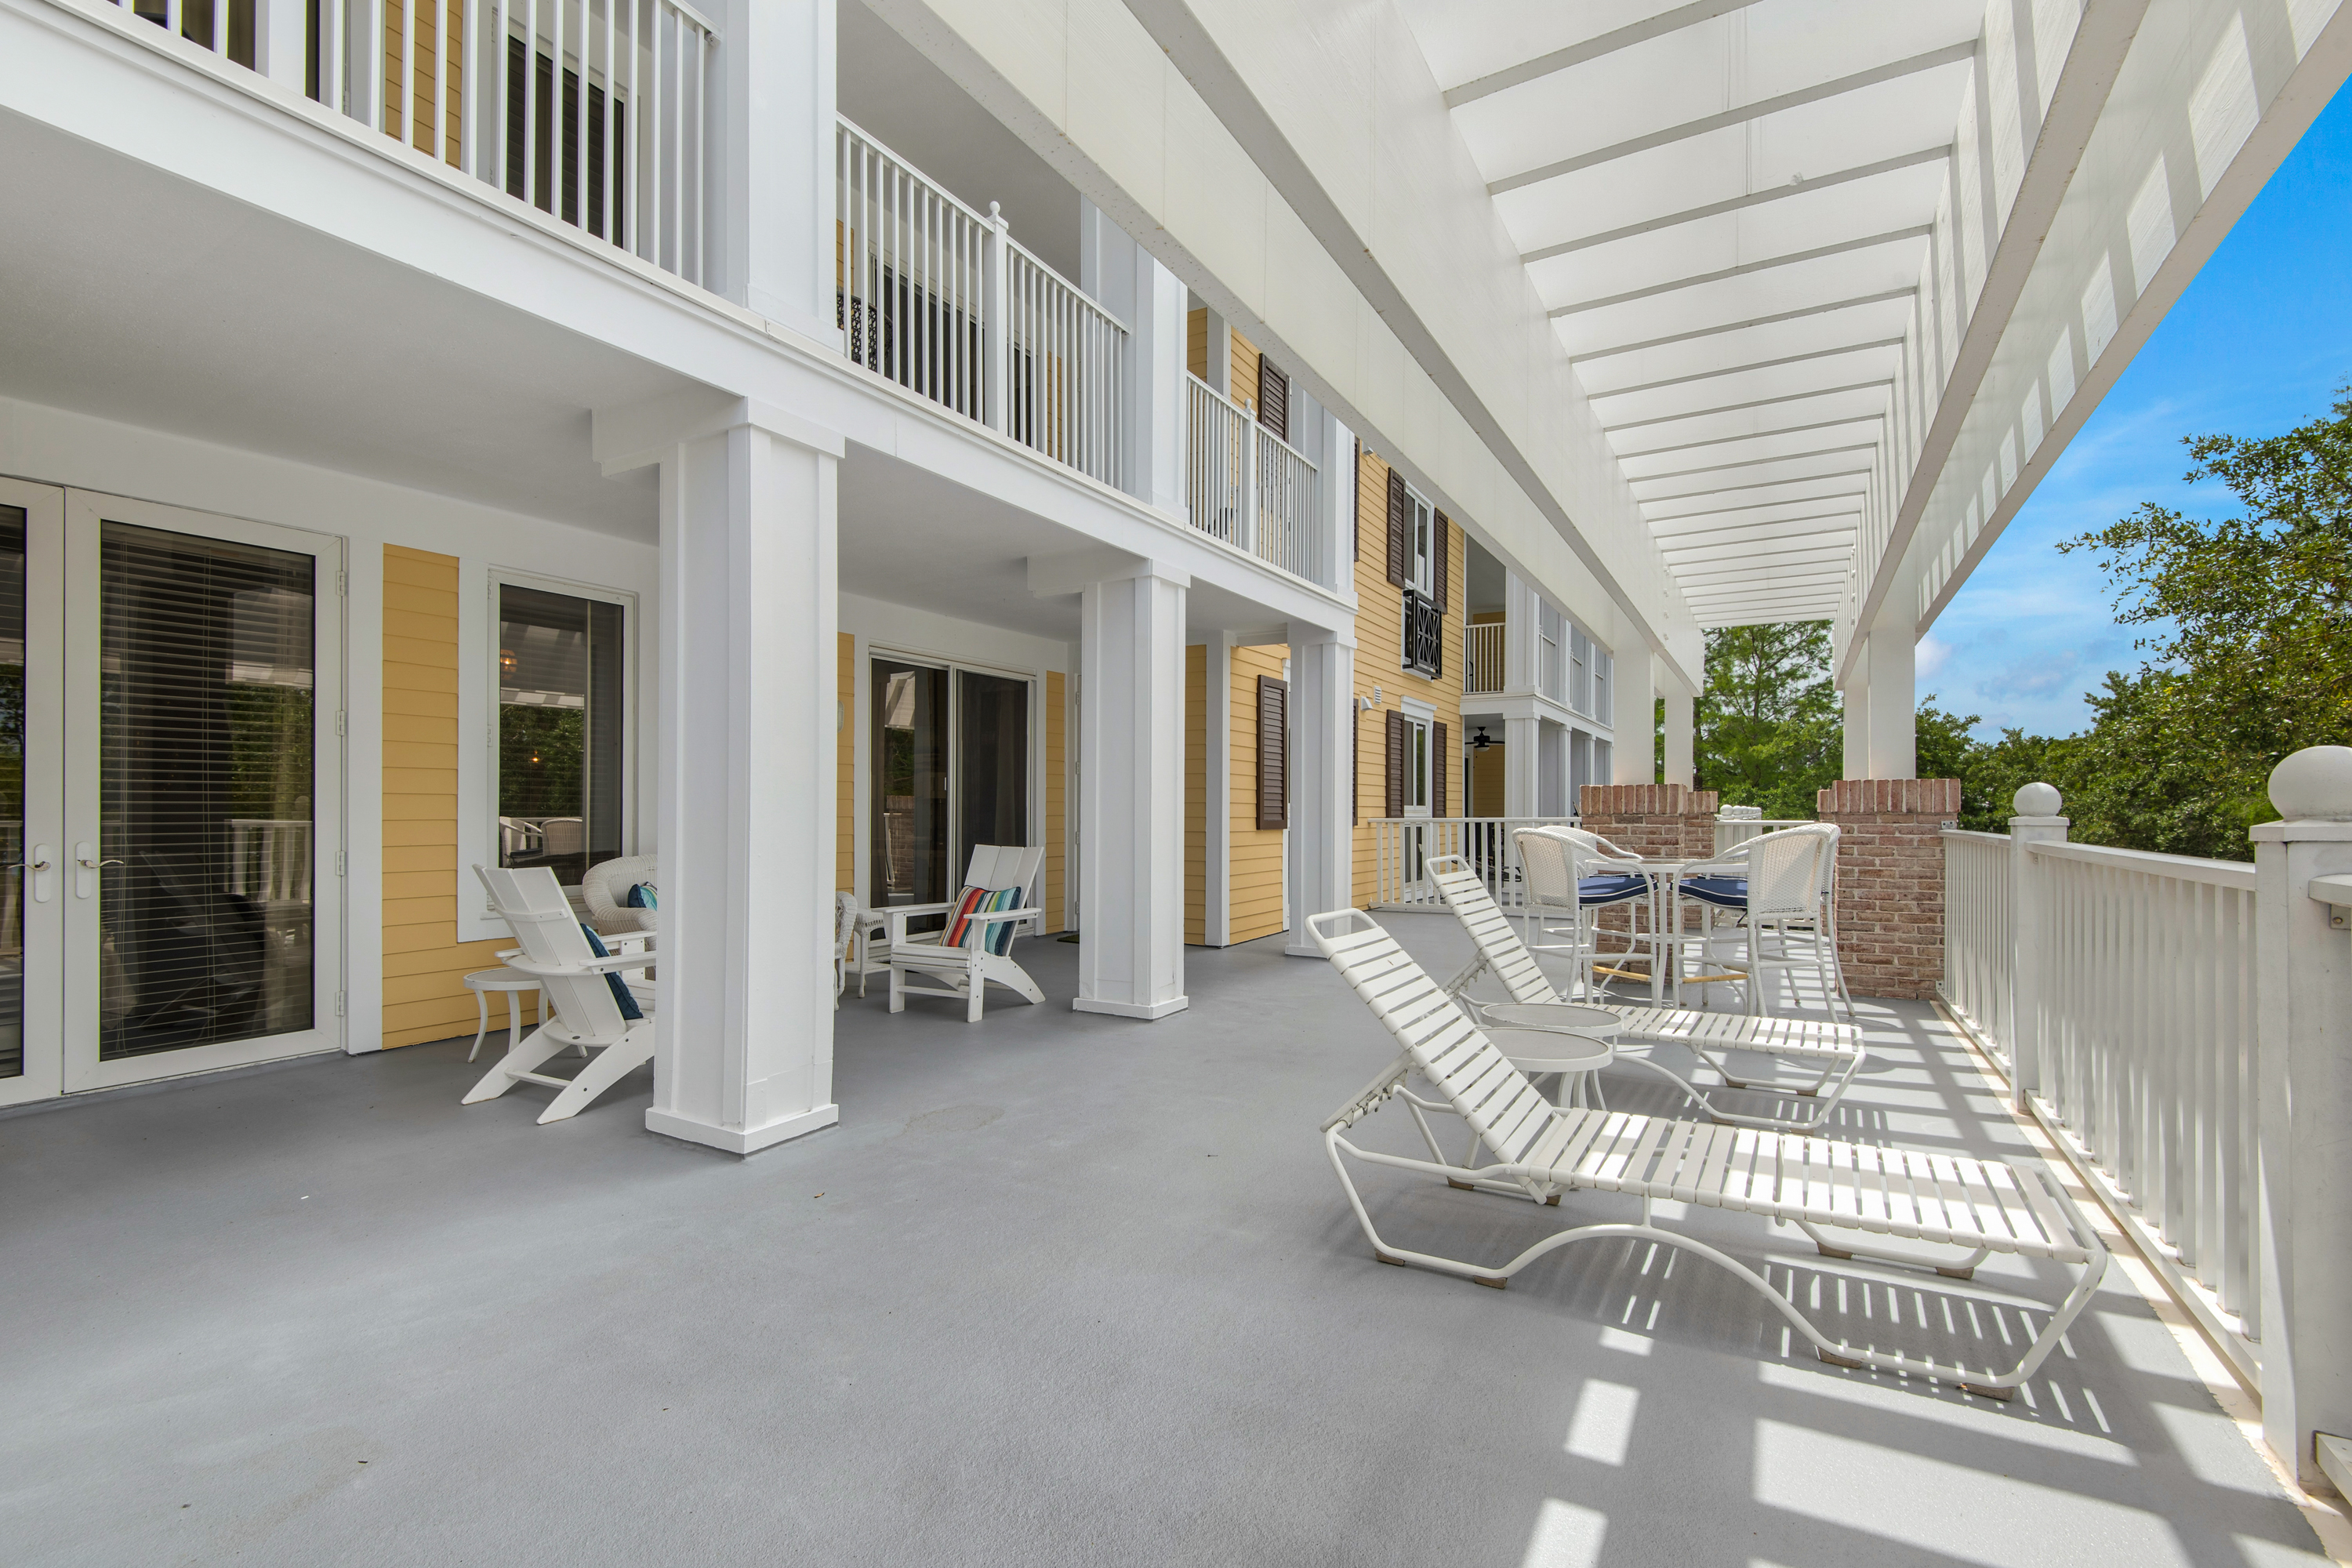 Prime Village Center Residence With Expansive Balcony At Baytowne Wharf